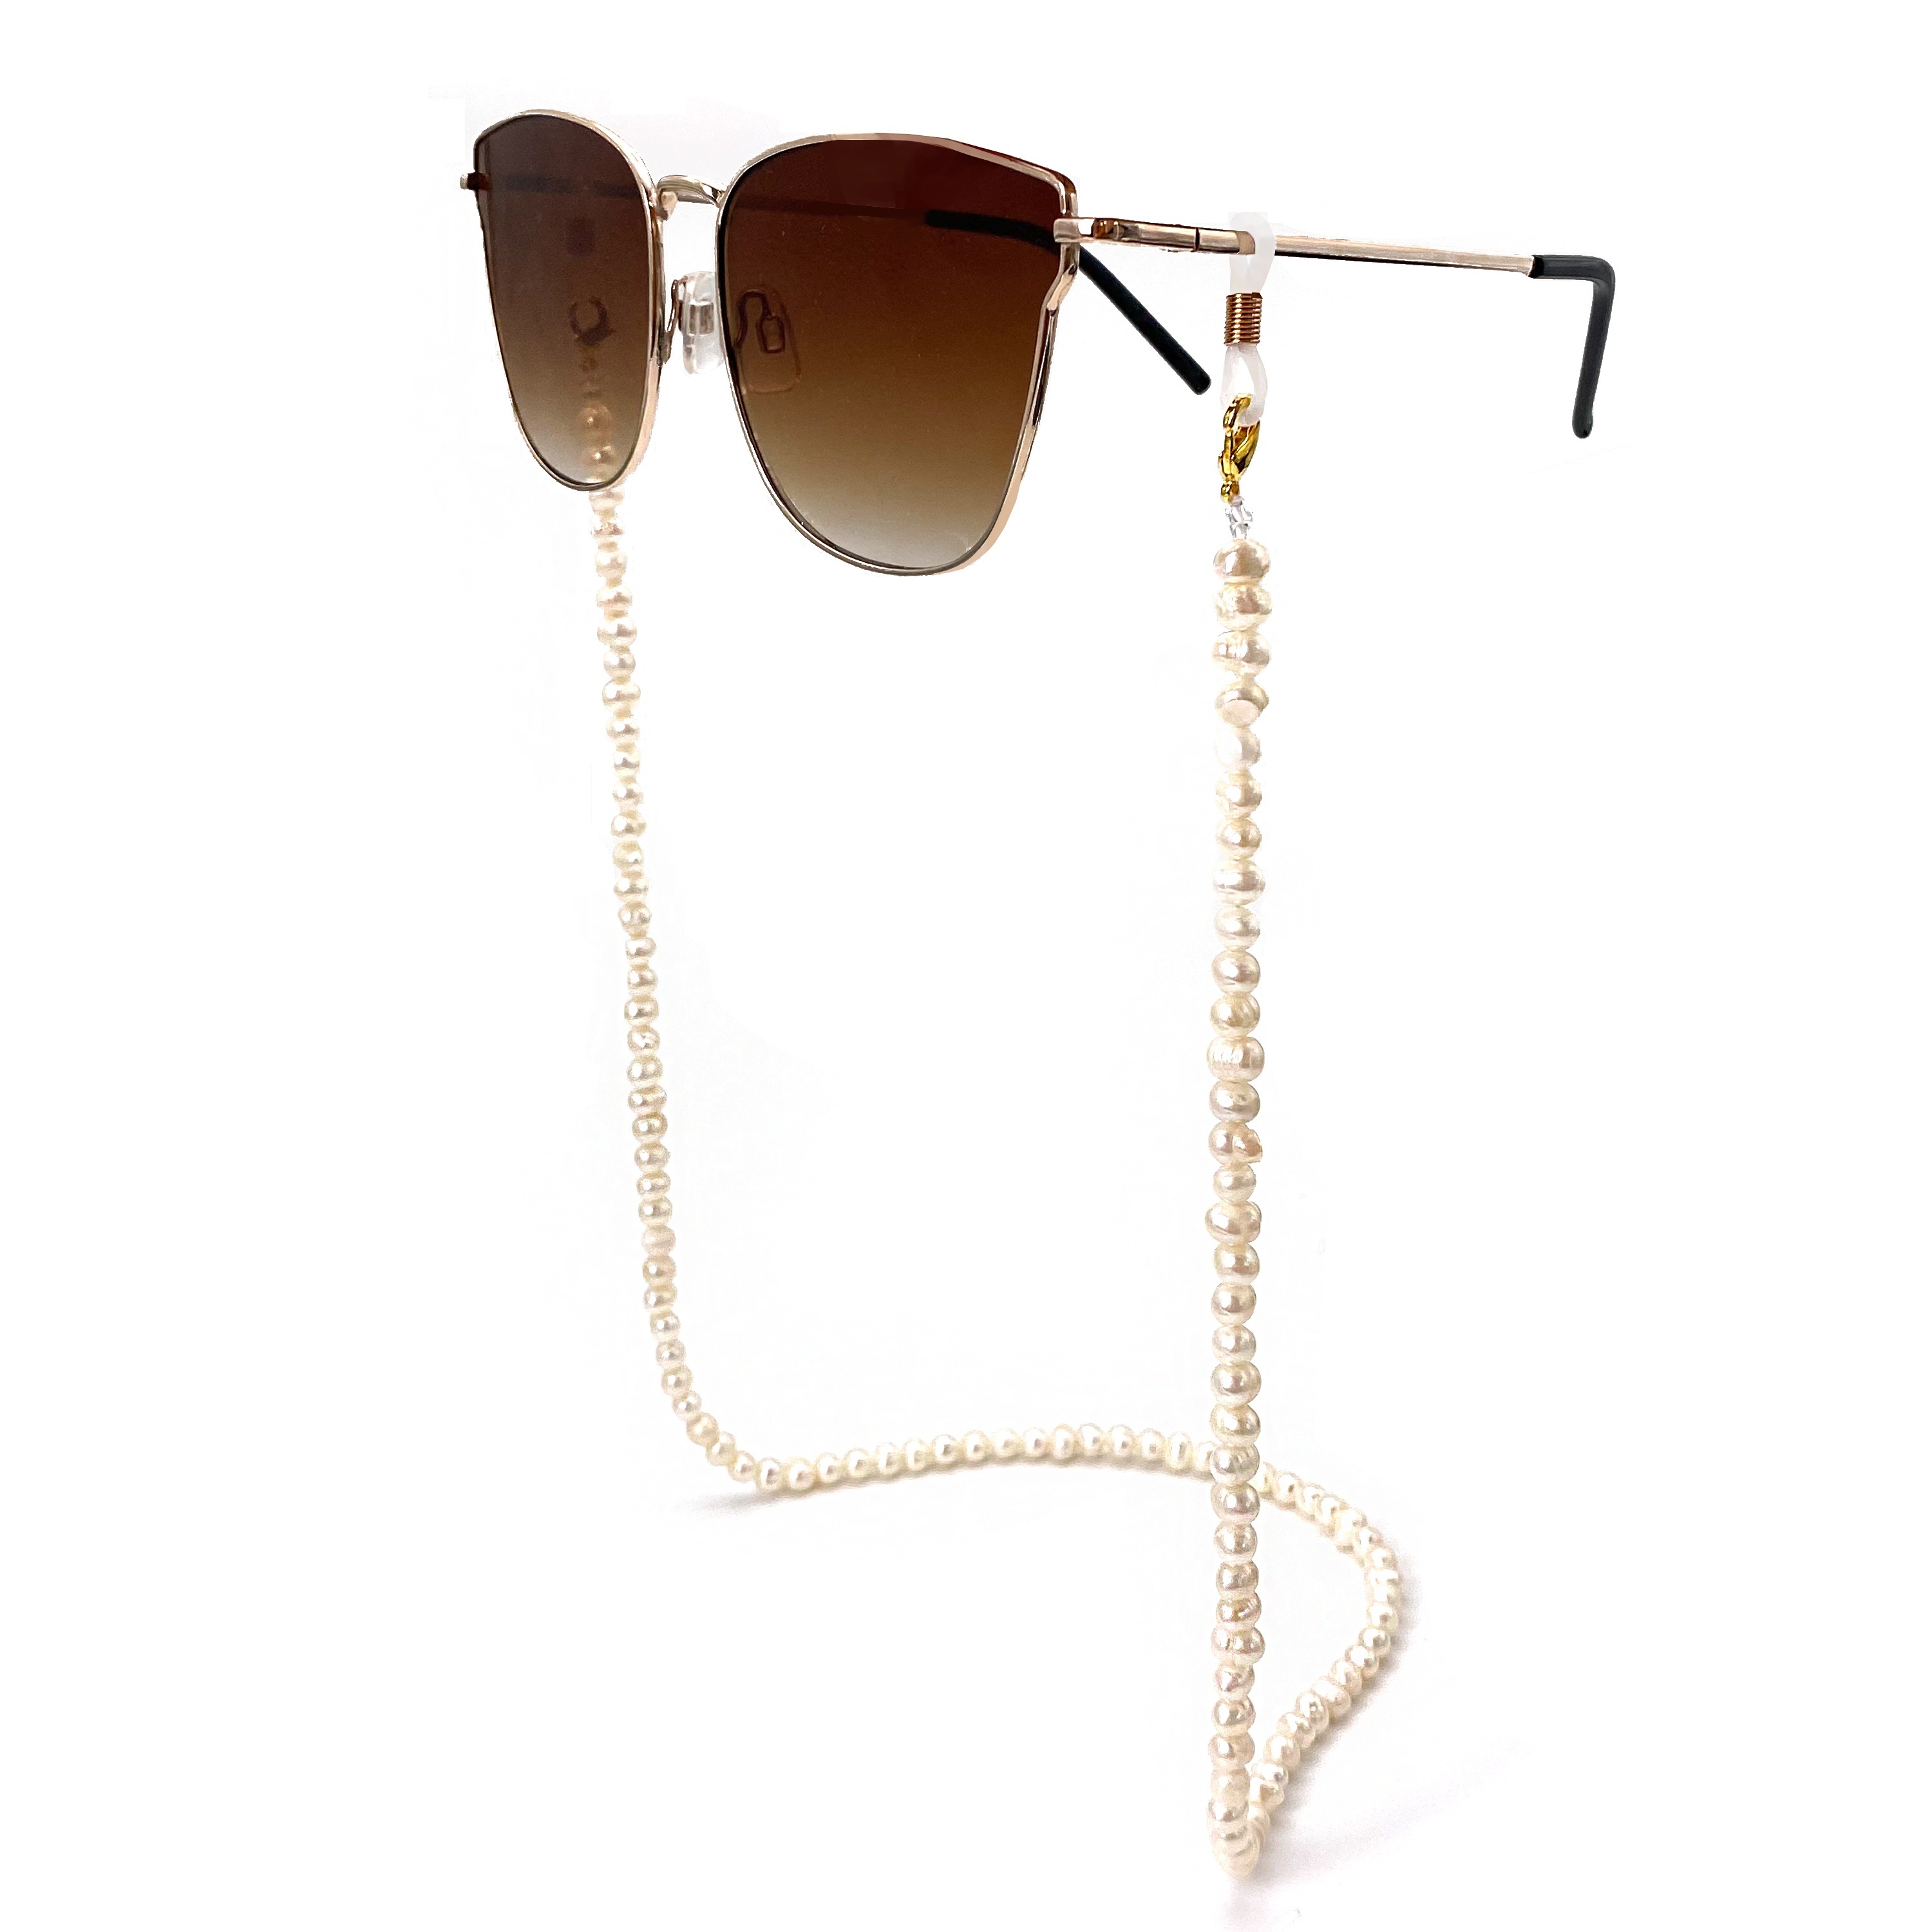 Faux Pearl Glasses Chain  Sunglass Strap in Gold with Pearls